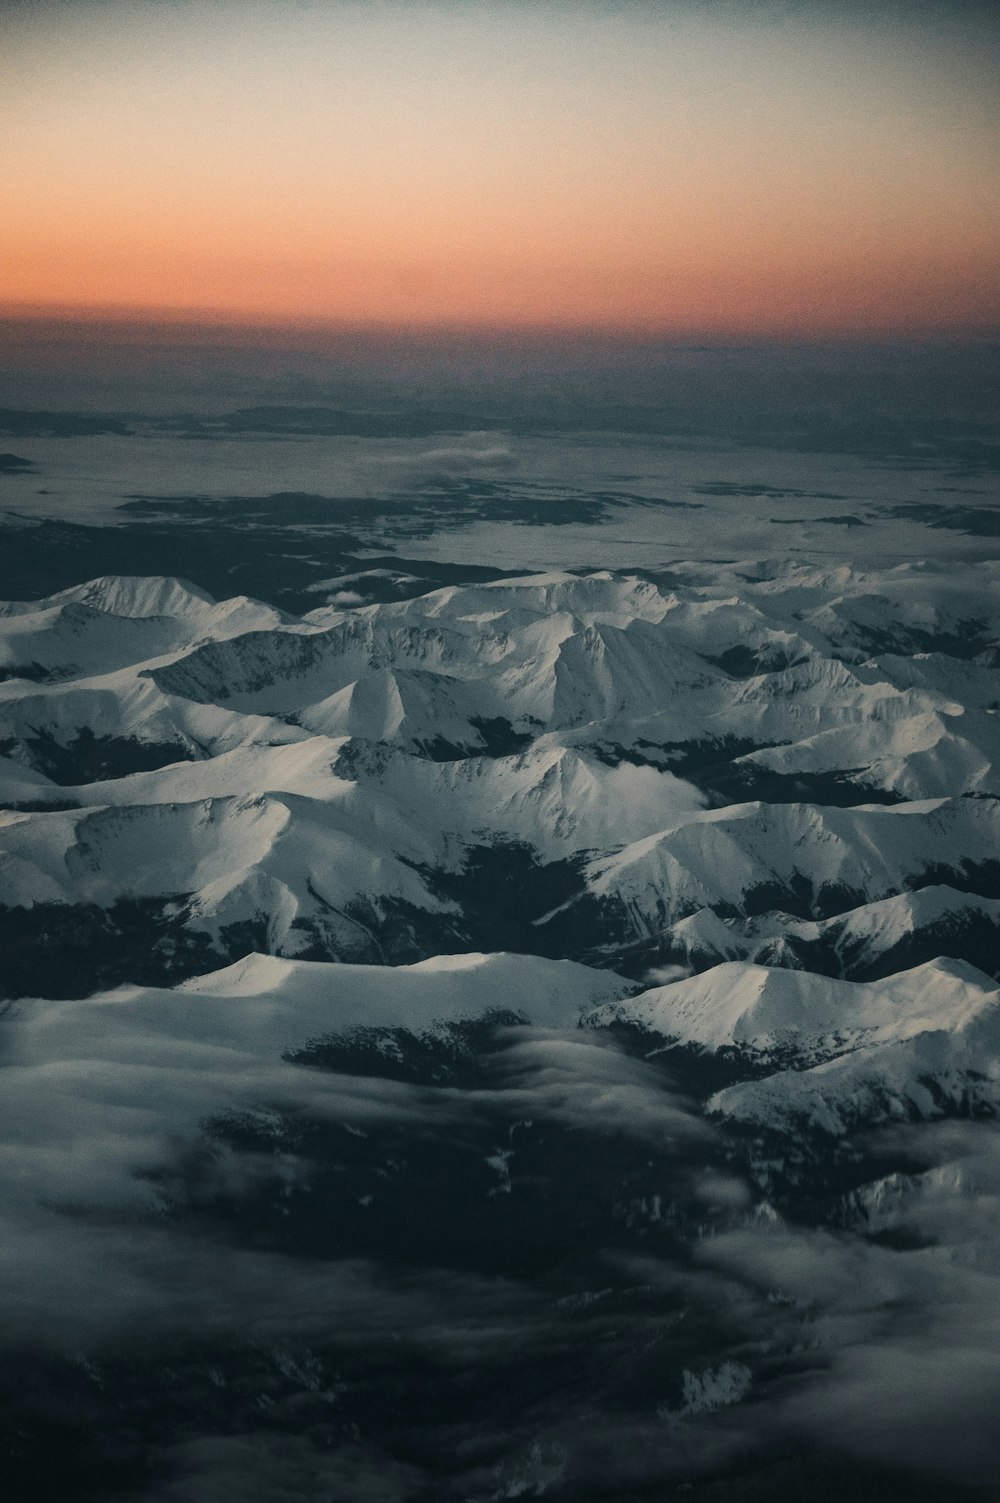 snow covered mountain during sunset